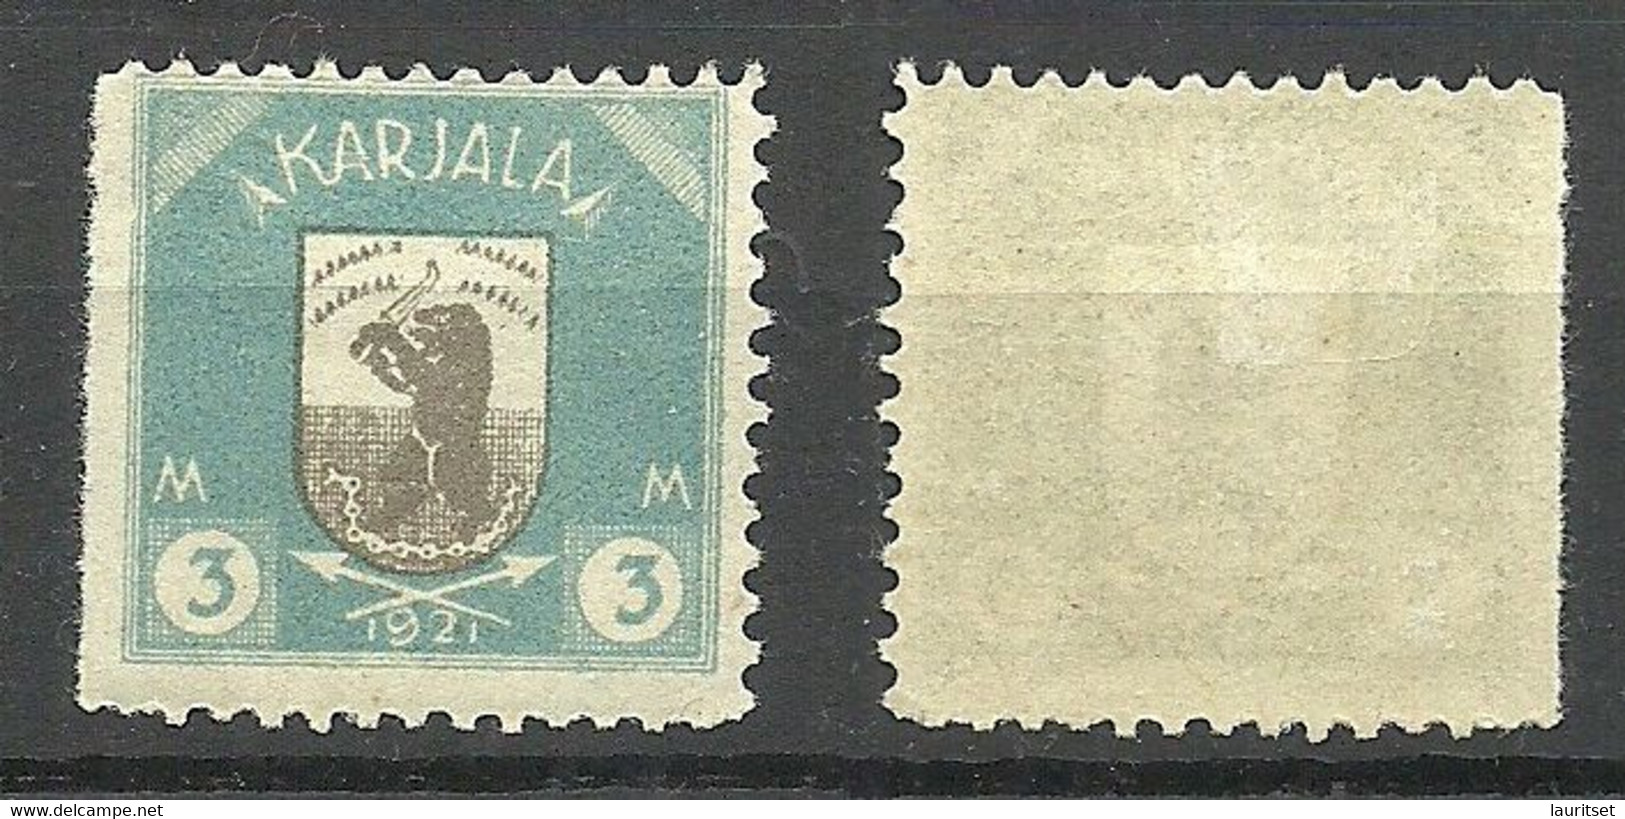 KARELIA Karelien FINLAND FINNLAND 1922 Michel 10 * NB! Variety Aart Left Side Seems To Be Imperforated! - Emissions Locales